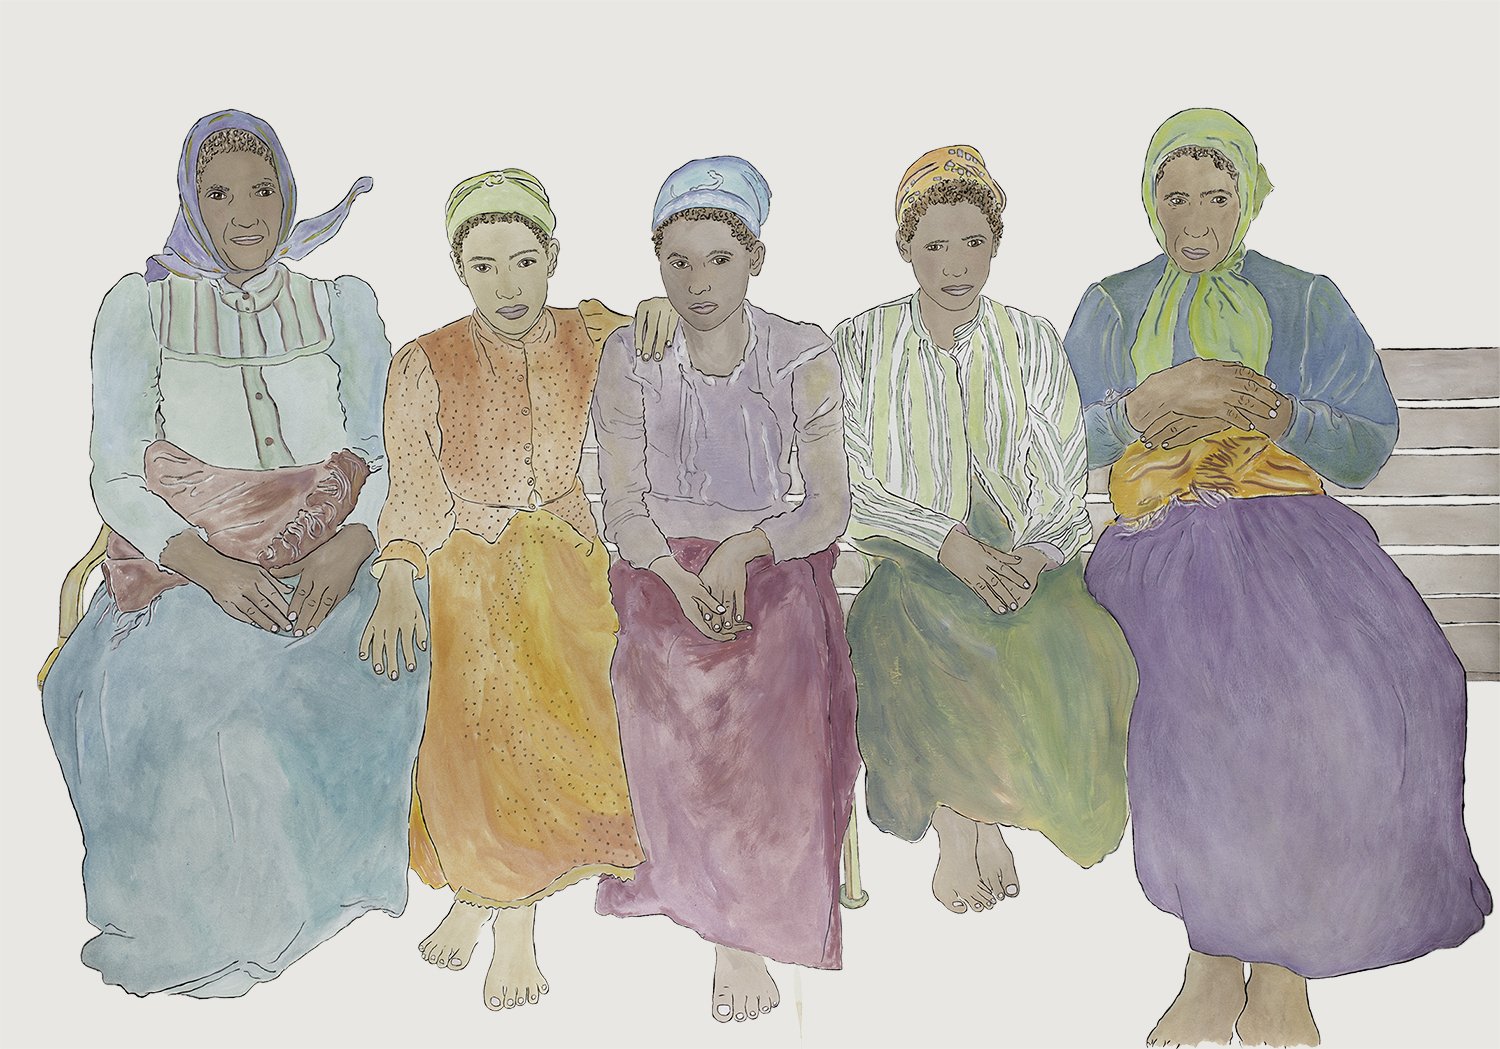   Available    Five Women on a Bench, Eastern Europen Immigrants at Ellis Island, United States, 1900   37” x 50”, gouache, watercolor, India ink on paper, 2022 